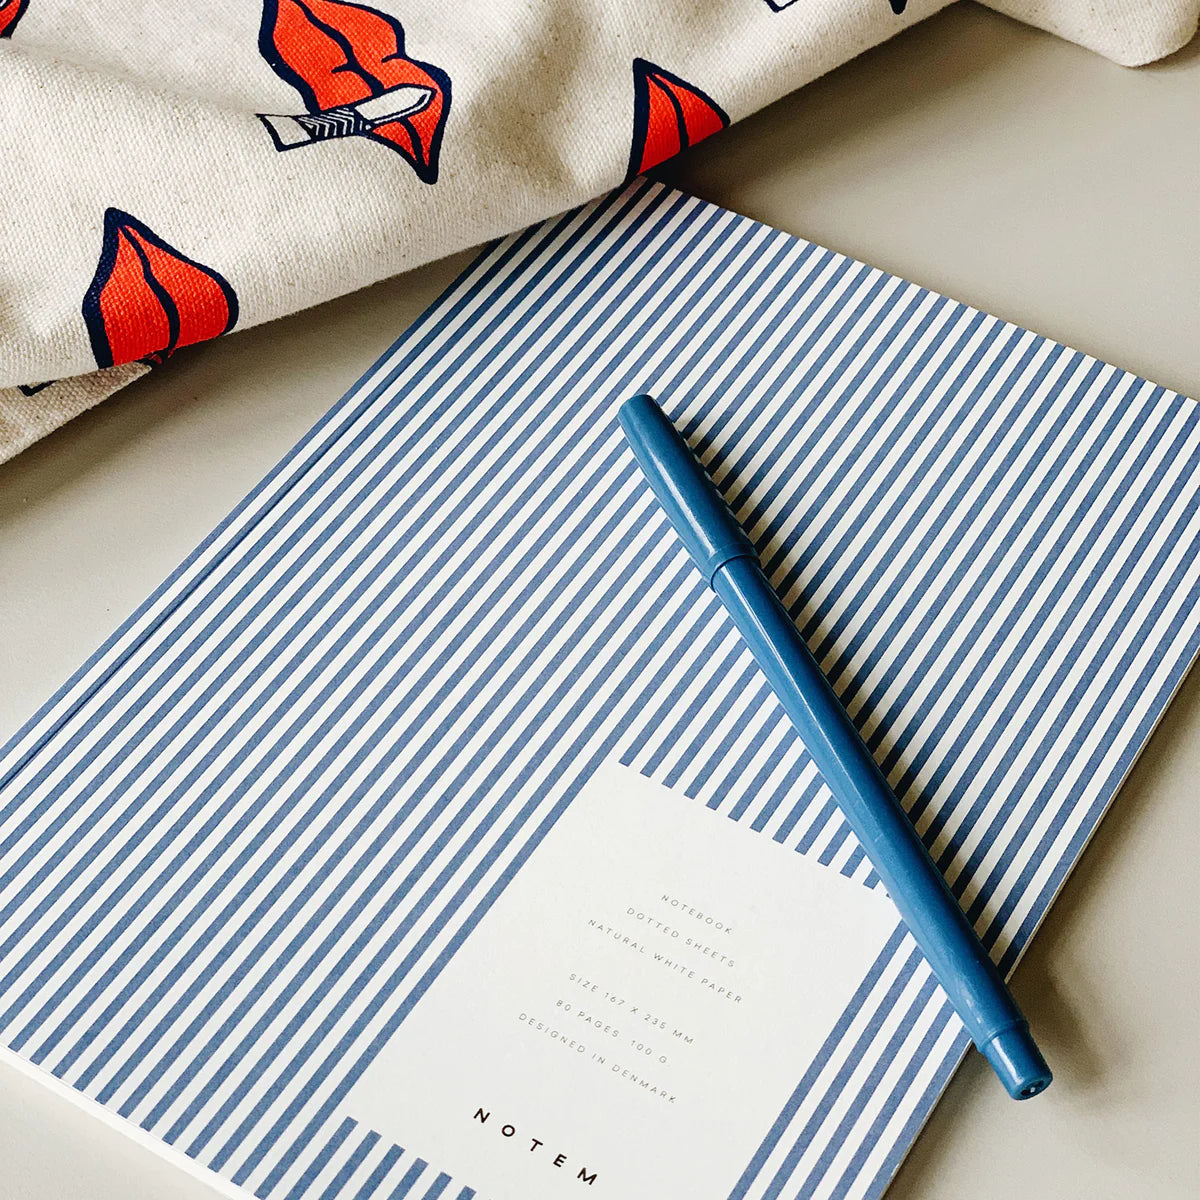 VITA MEDIUM SOFTCOVER NOTEBOOK | BLUE LINES with blue pen next to canvas bag